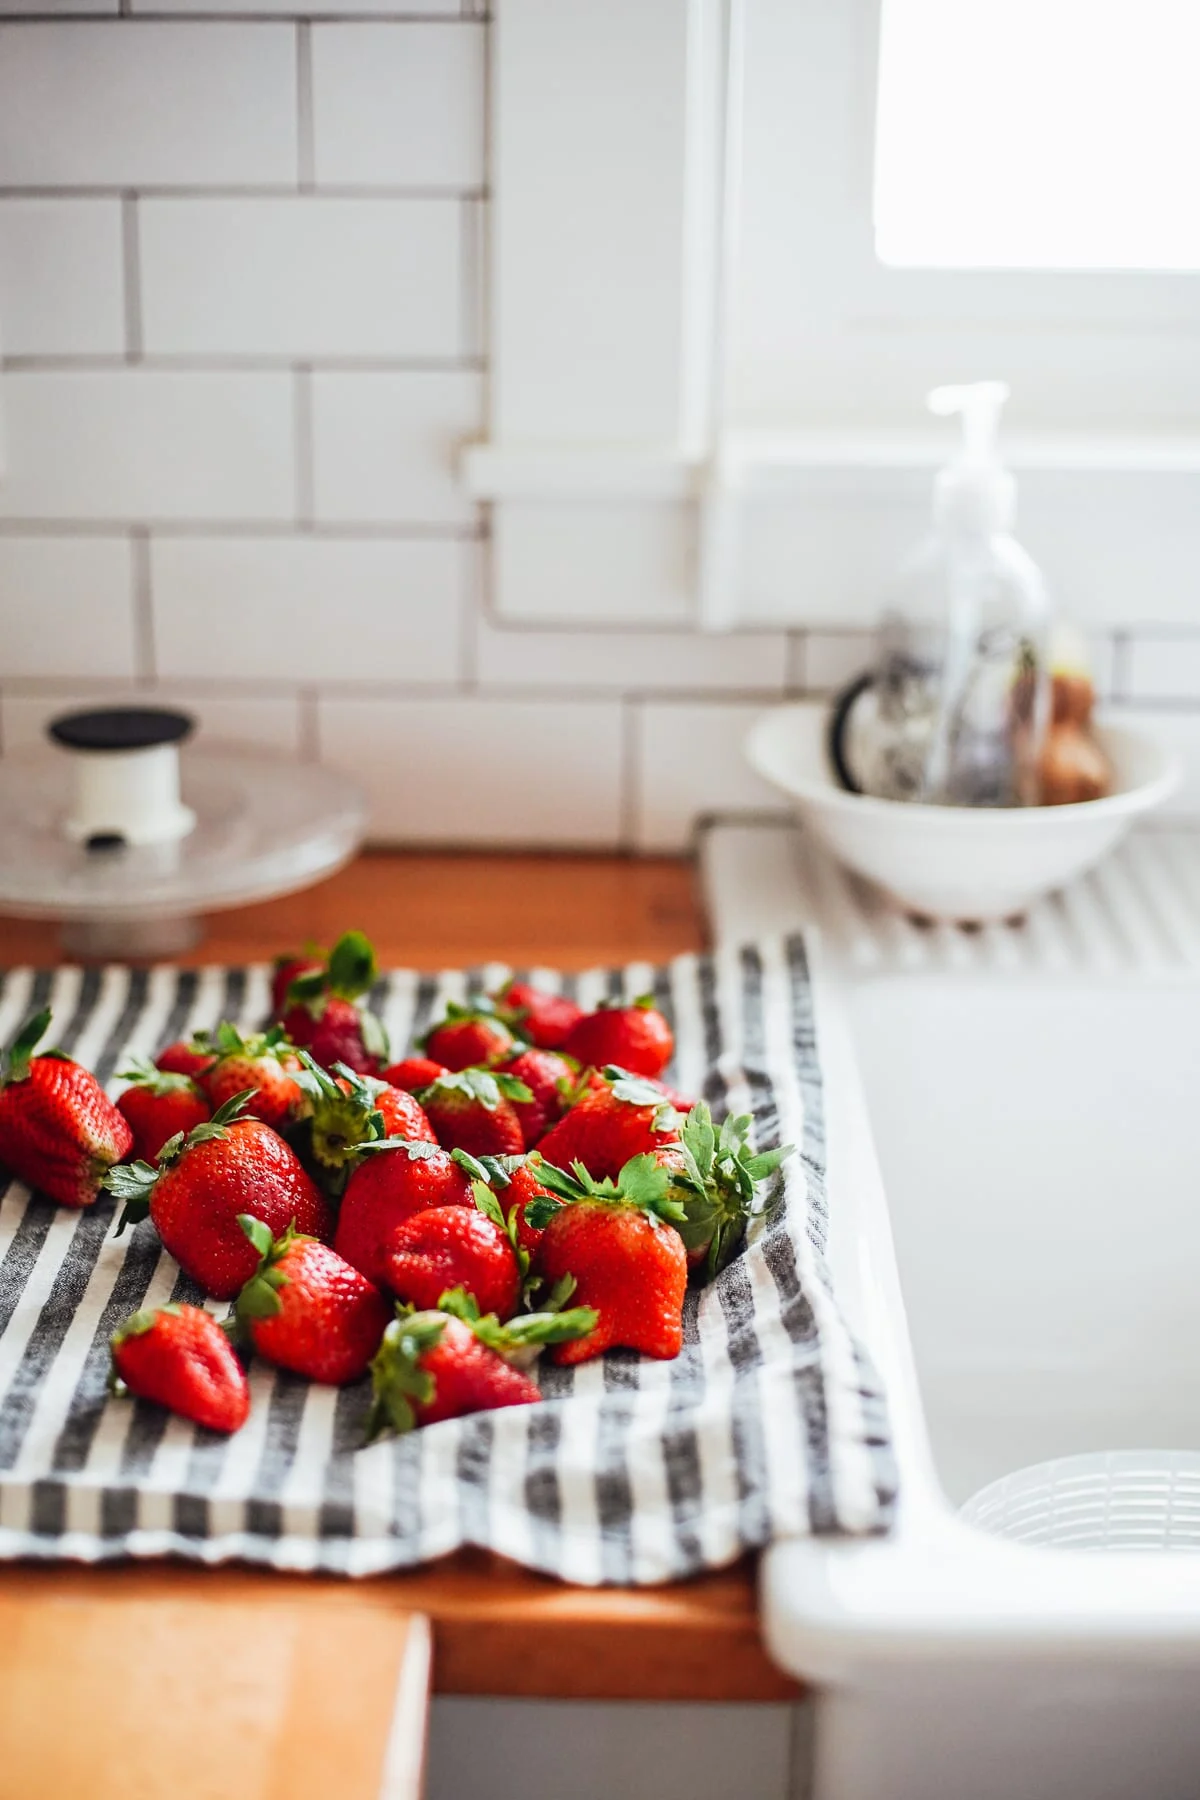 how to clean strawberries with salt